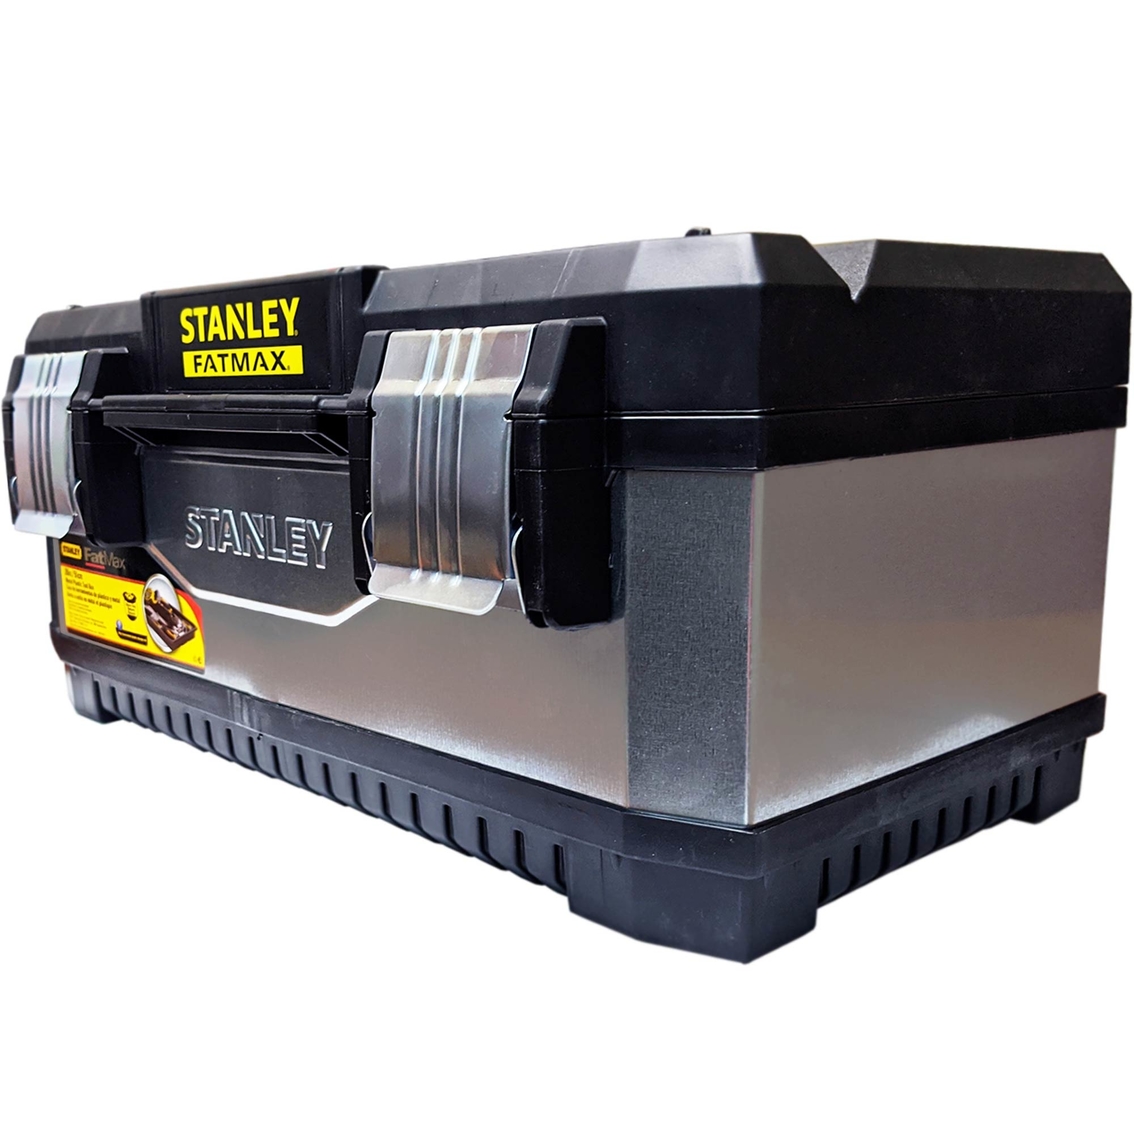 Stanley 20 in. Fatmax Metal and Plastic Toolbox - Image 3 of 4